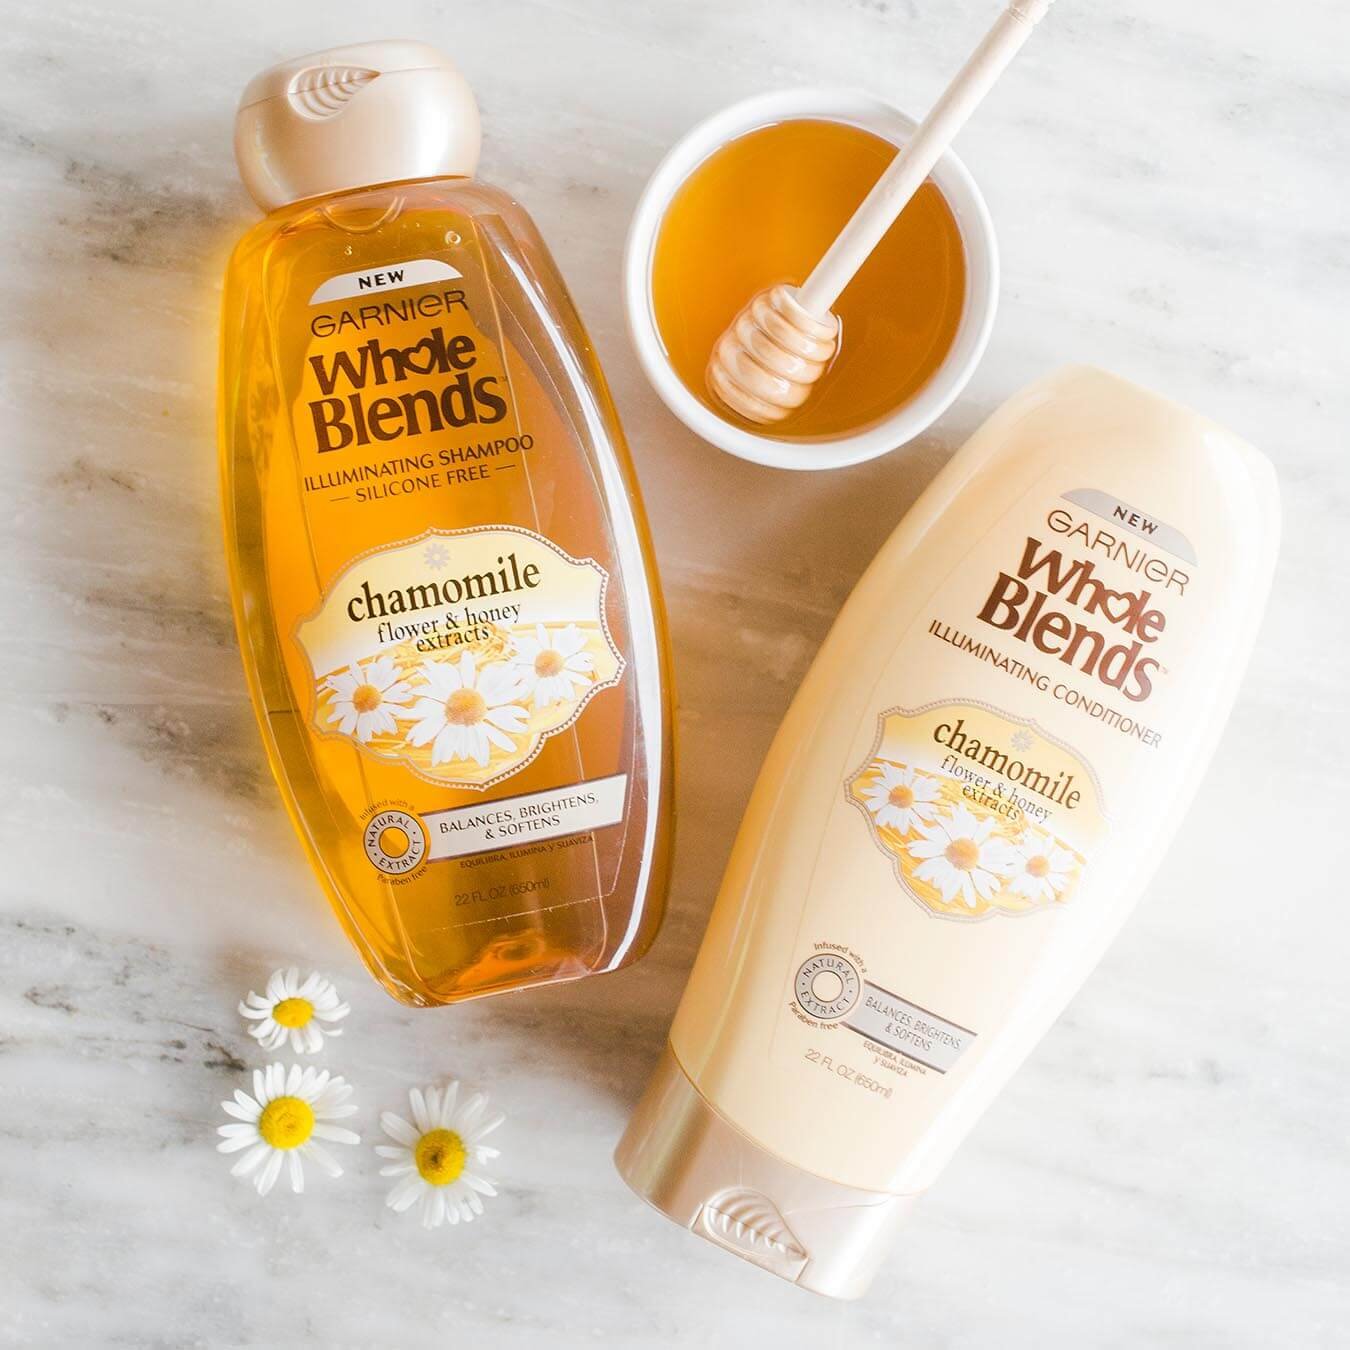 Whole Blends Chamomile Illuminating Shampoo with Flower and Honey Extracts and Chamomile Illuminating Conditioner with Flower and Honey Extracts on white marble with daisy blossoms and a ramekin of honey with a honey dipper.